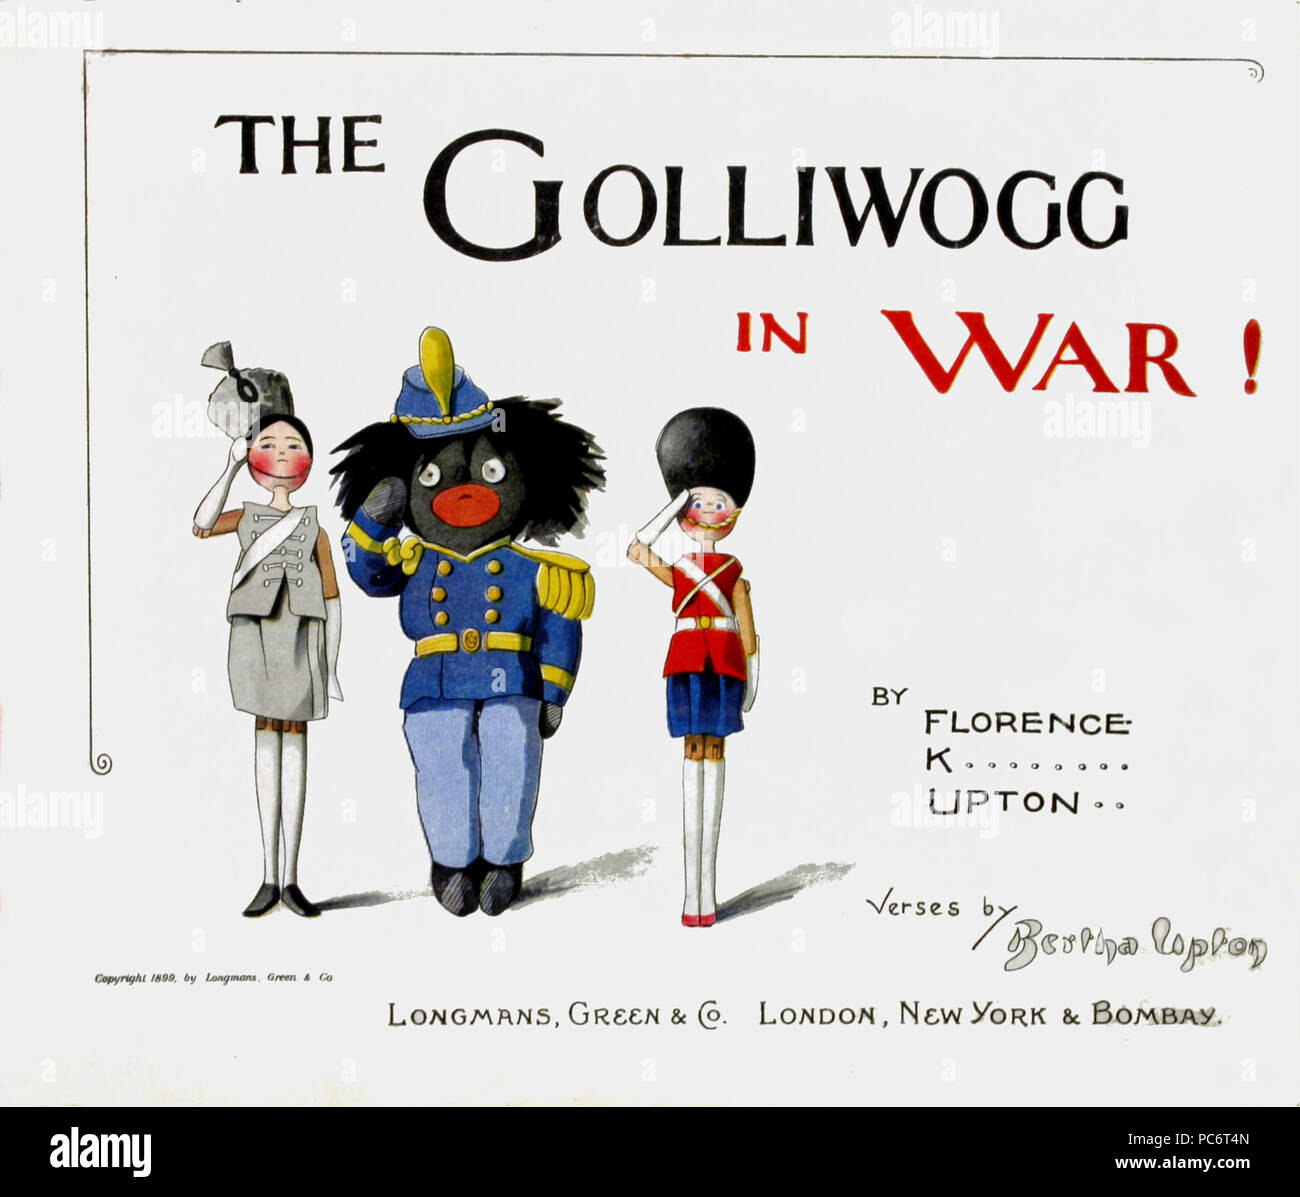 596 The Golliwog in War! cover Stock Photo